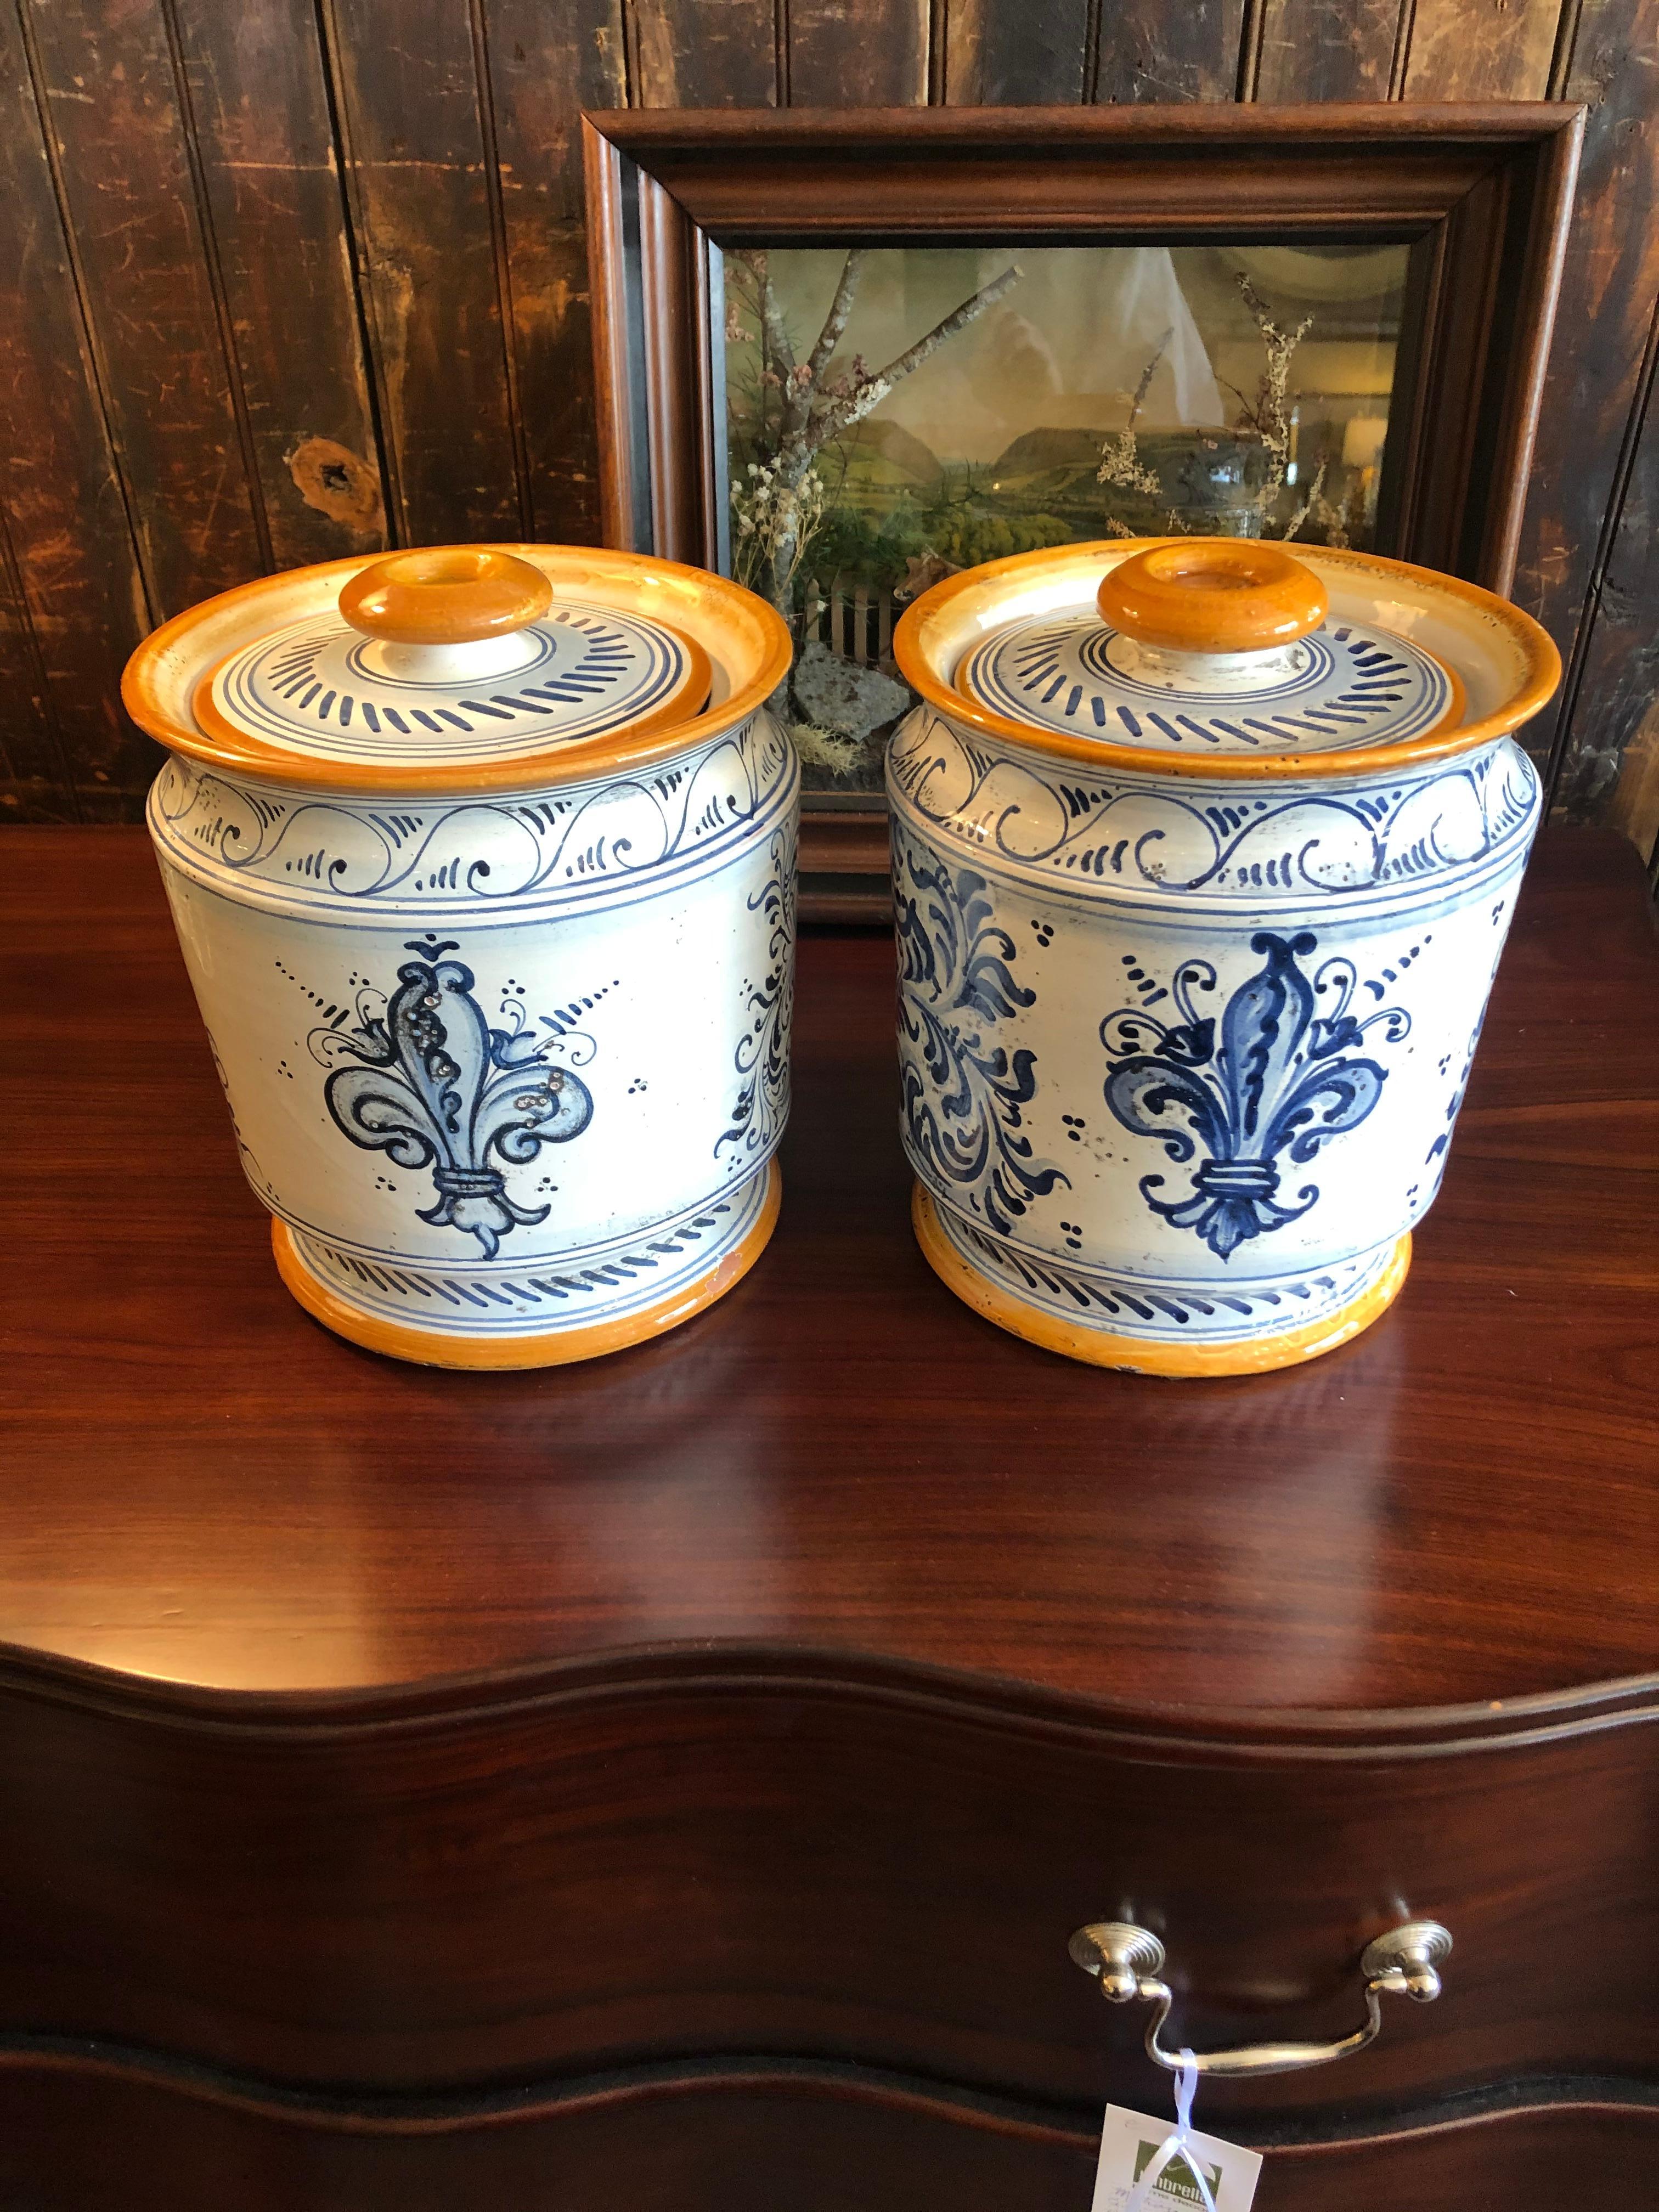 Beautifully painted ceramic lidded jar having a matched male and female with Provencal style decoration and color palette.